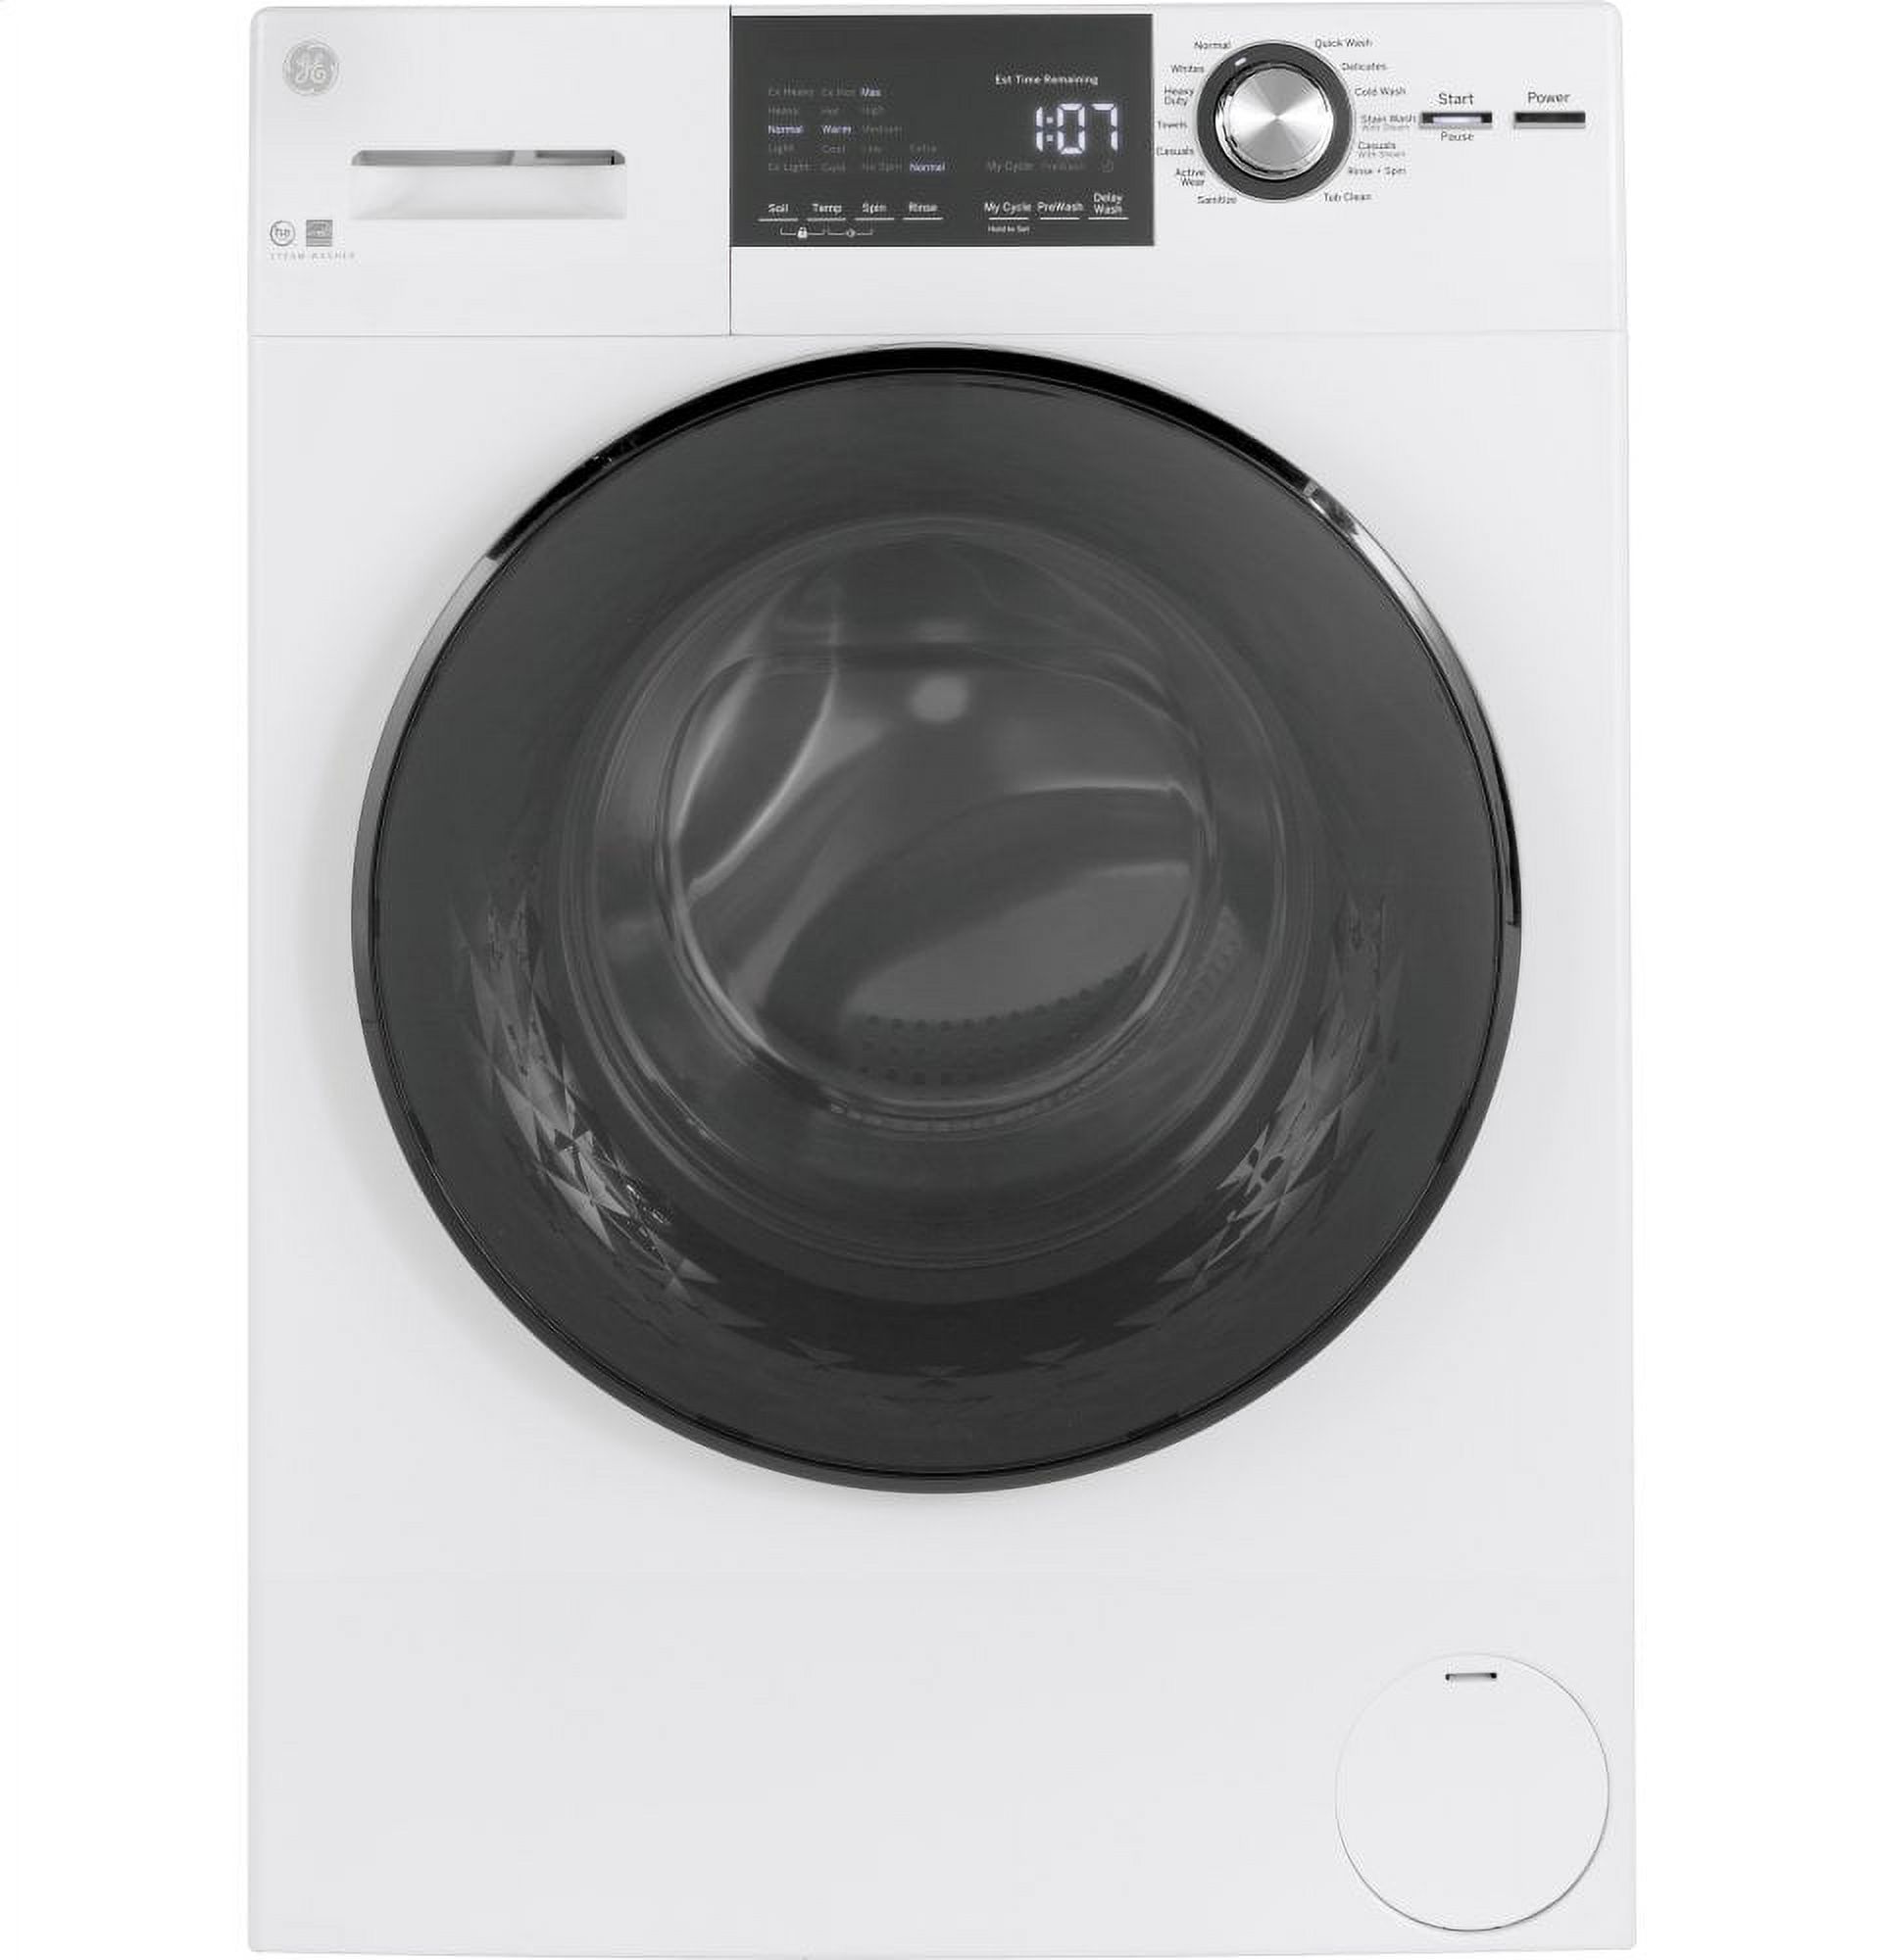 GENERAL ELECTRIC GFW148SSMWW 24 Frontload Washer with Steam 2.4 cu. ft. Capacity Plugs into Dryer or Wall Energy Star Electronic Touch Controls in White - image 1 of 5